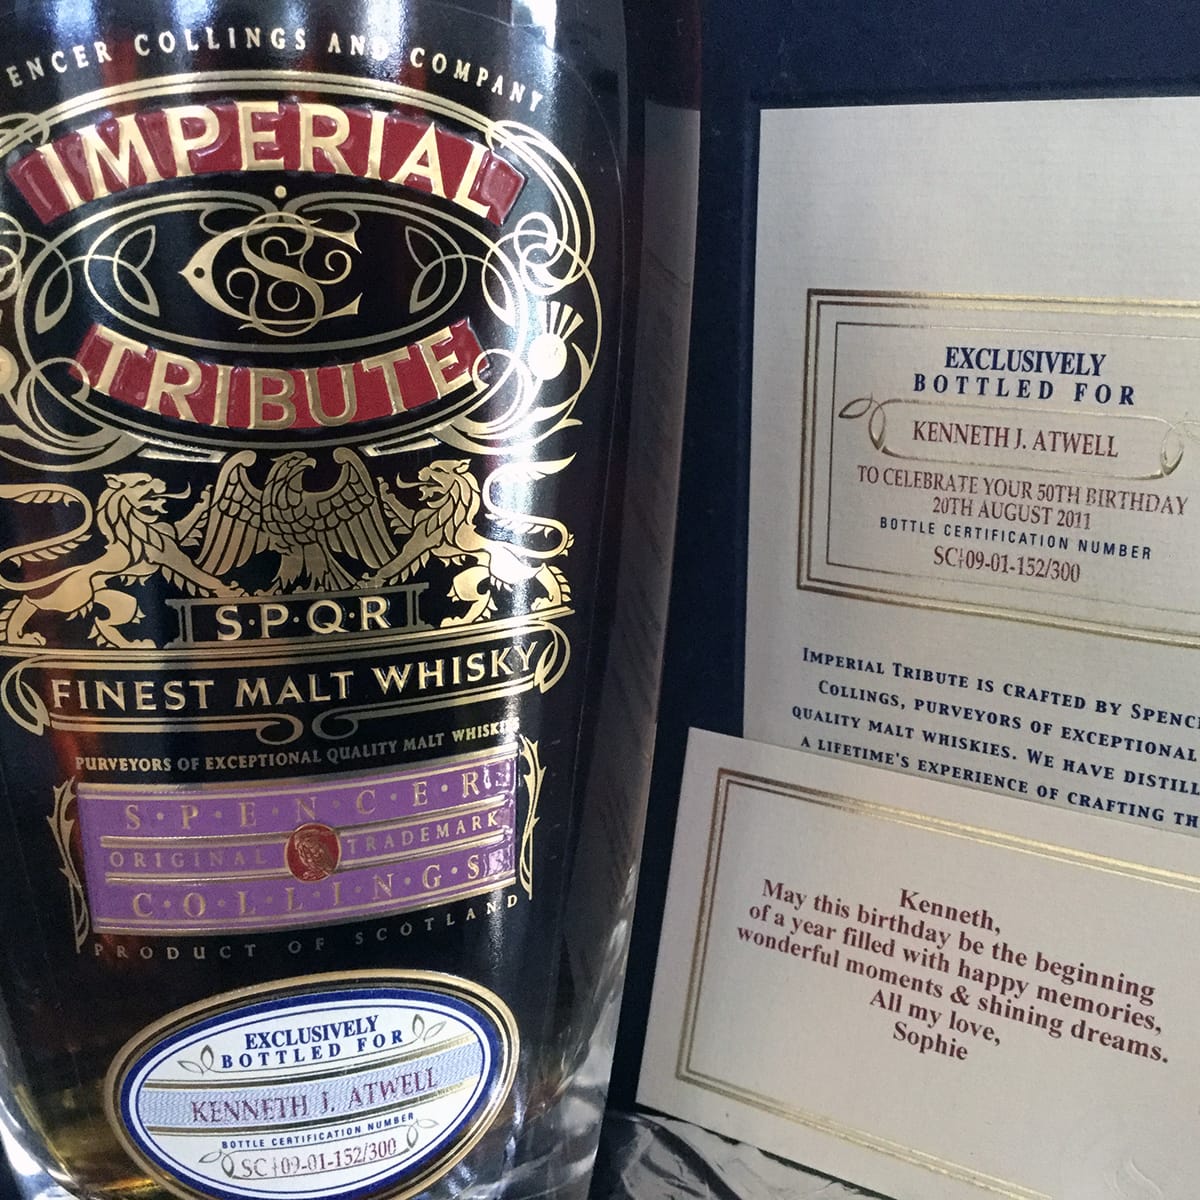 Imperial Tribute Premium Blended Scotch Whisky Gift With a beautiful bottle